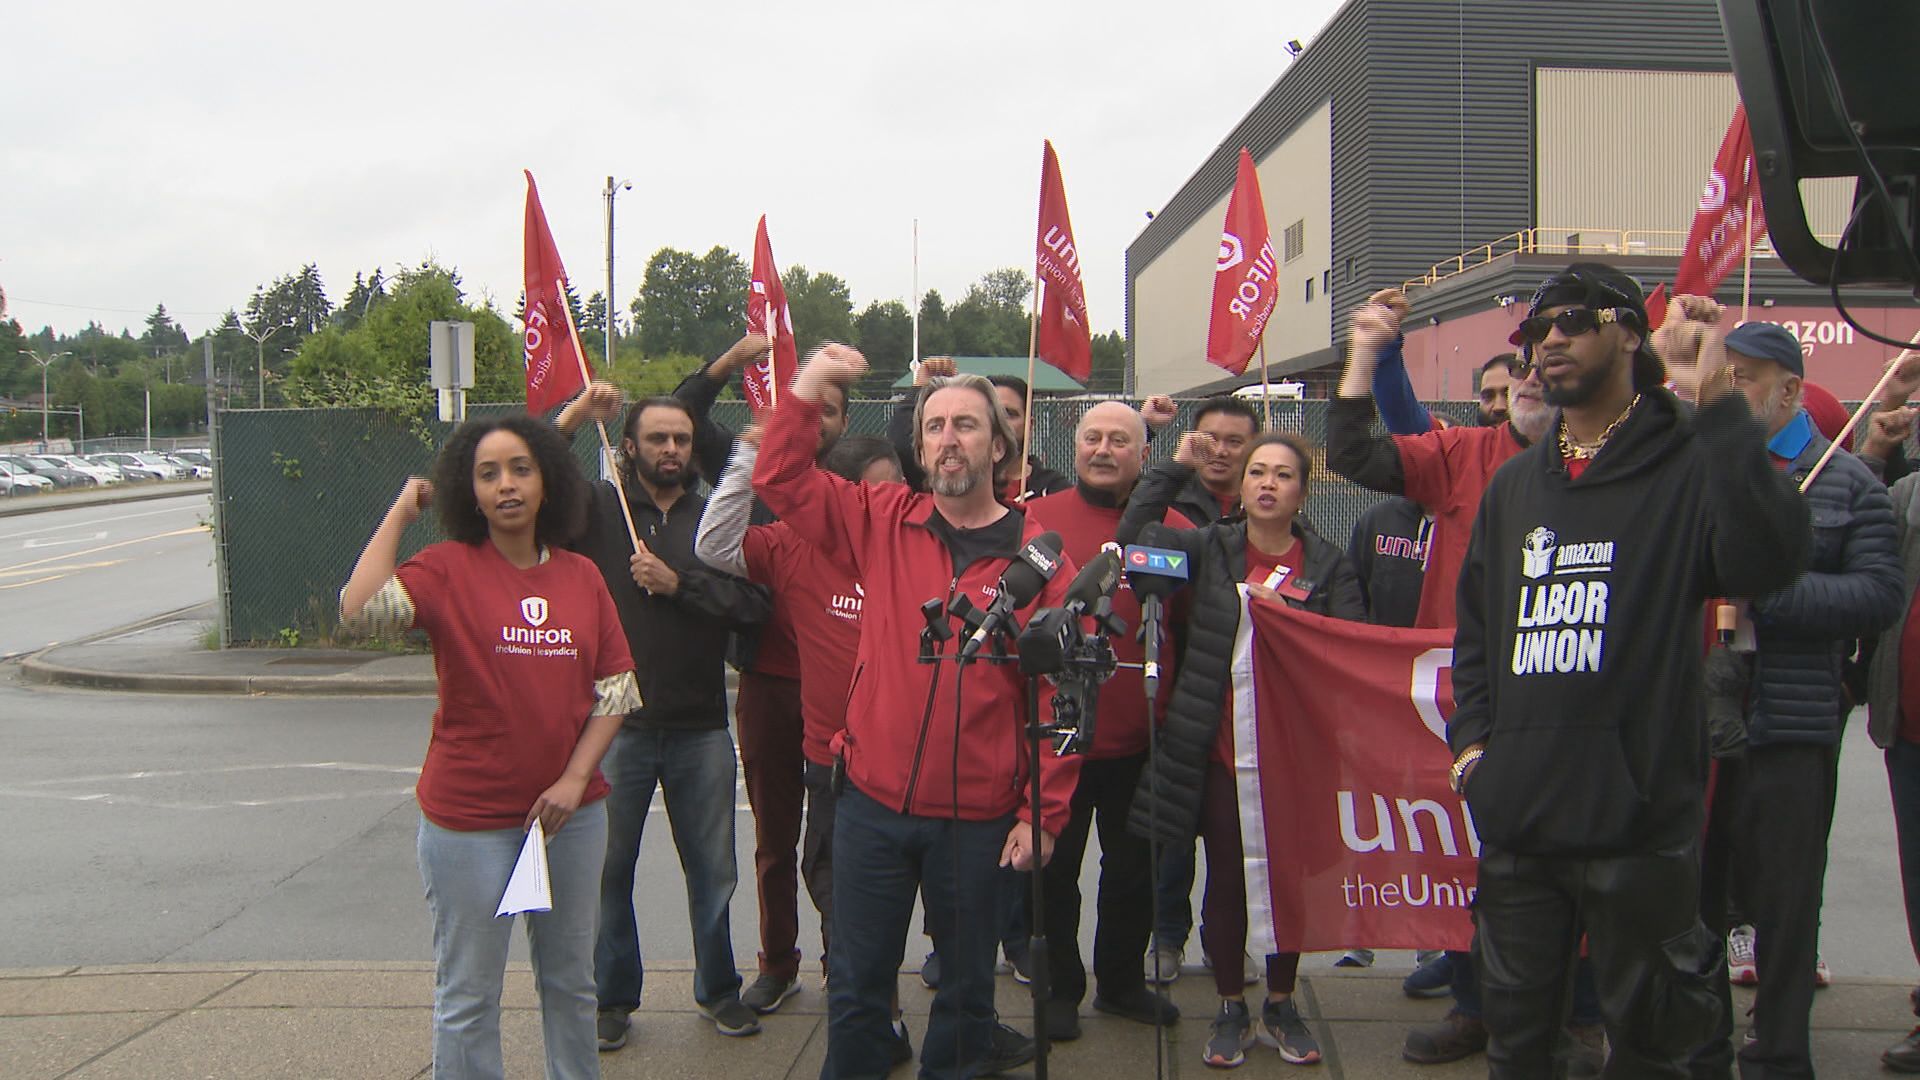 A group of people gather at a Unifor Amazon event in Metro Vancouver.